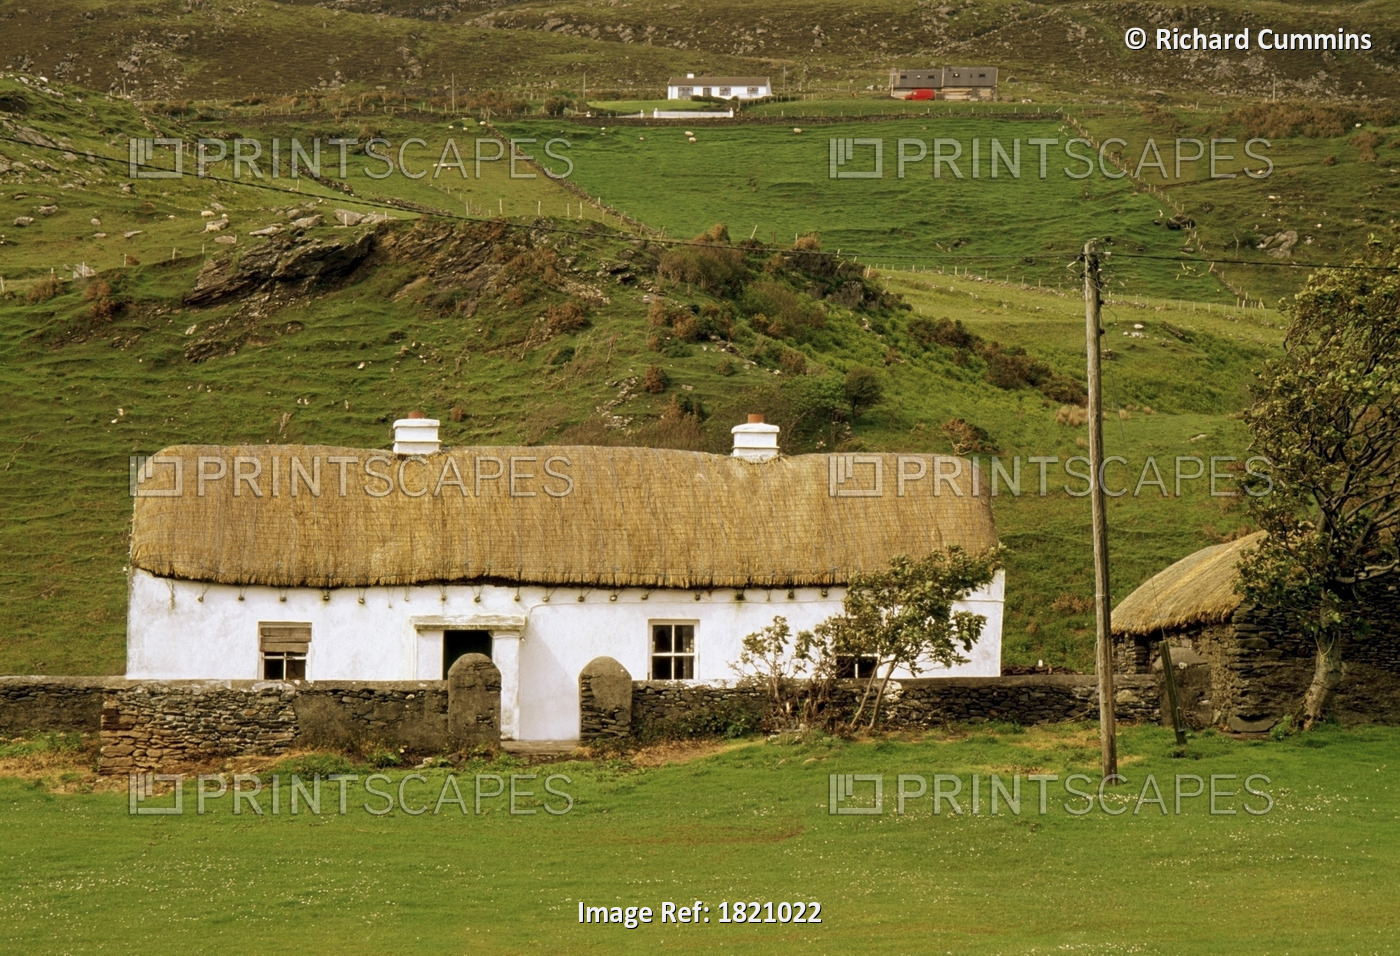 Glencolumbkille, County Donegal, Ireland; Traditional Thatched Roof Cottage